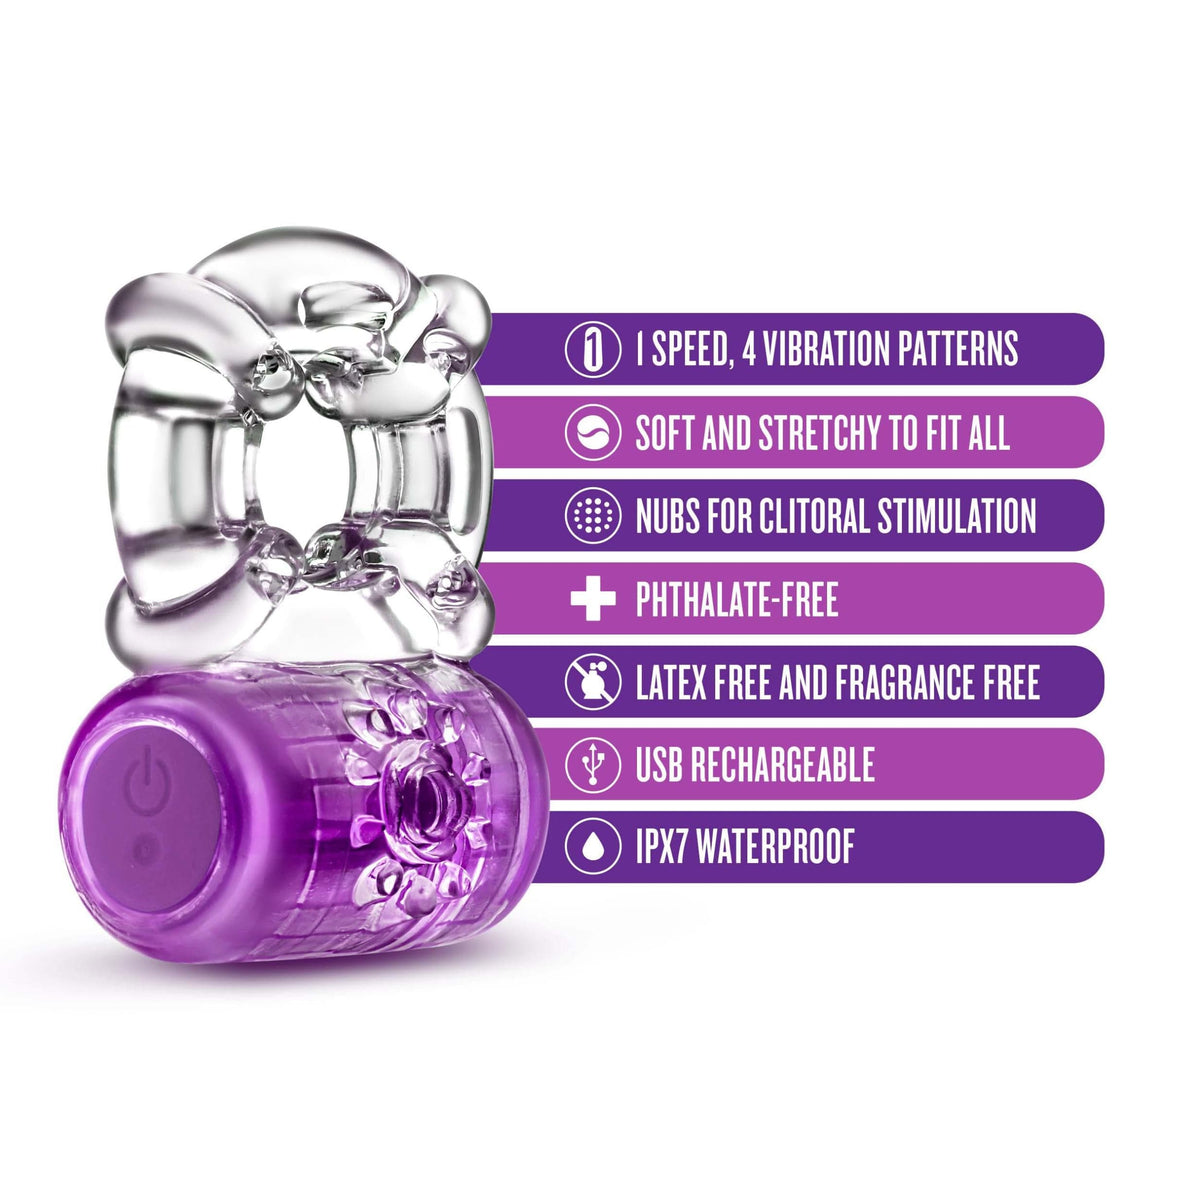 play with me pleaser rechargeable c ring purple